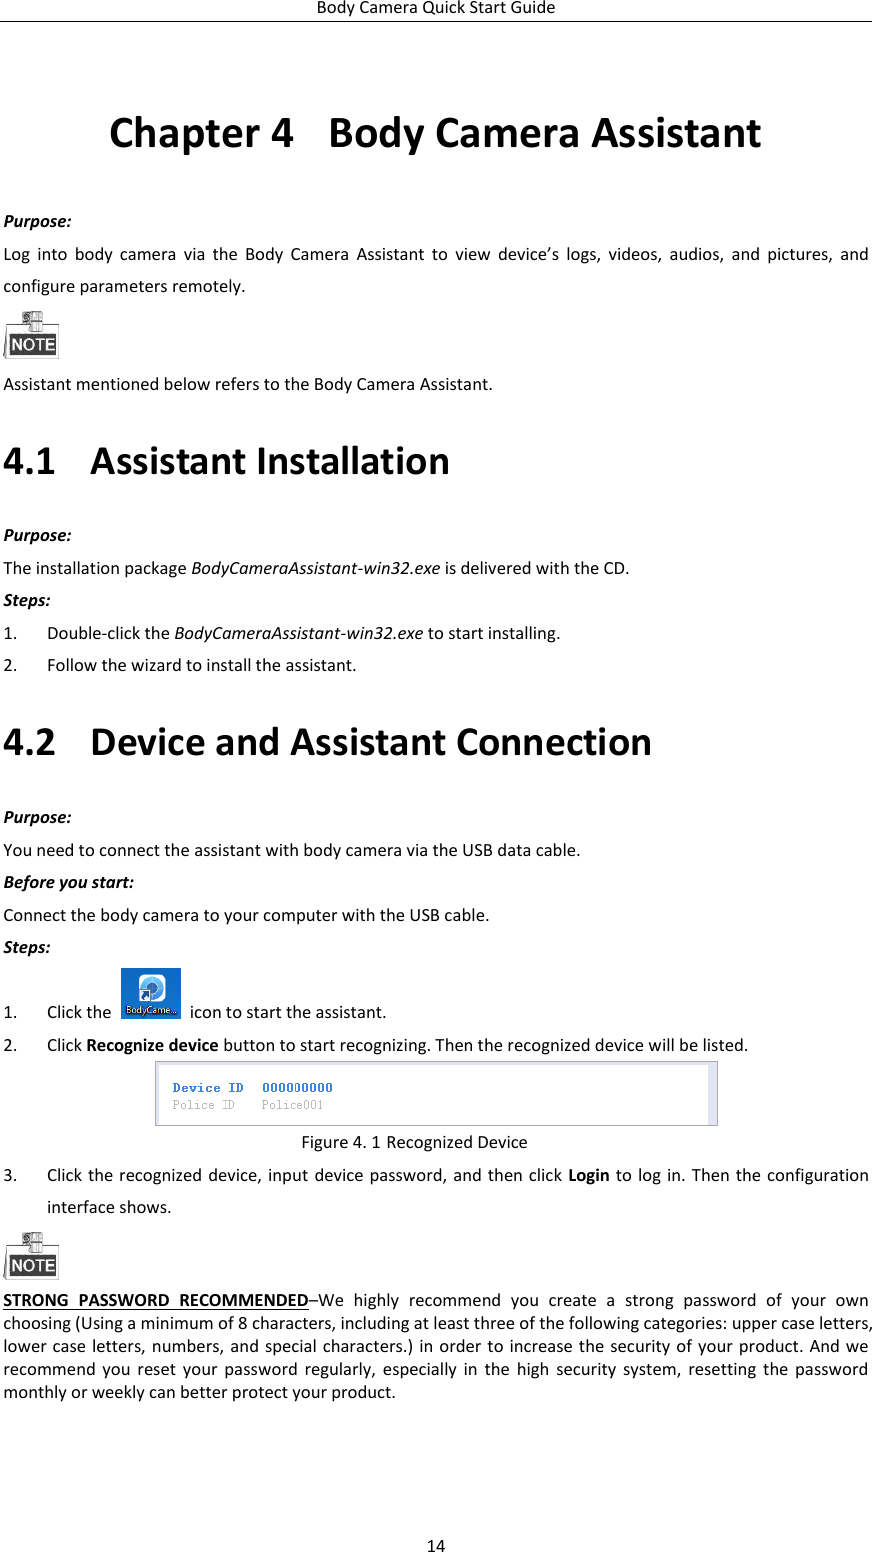 Body Camera Quick Start Guide 14 Chapter 4  Body Camera Assistant Purpose: Log  into  body  camera  via  the  Body  Camera  Assistant  to  view  device’s  logs,  videos,  audios,  and  pictures,  and configure parameters remotely.  Assistant mentioned below refers to the Body Camera Assistant. 4.1 Assistant Installation Purpose: The installation package BodyCameraAssistant-win32.exe is delivered with the CD. Steps: 1. Double-click the BodyCameraAssistant-win32.exe to start installing. 2. Follow the wizard to install the assistant. 4.2 Device and Assistant Connection Purpose: You need to connect the assistant with body camera via the USB data cable. Before you start: Connect the body camera to your computer with the USB cable. Steps: 1. Click the    icon to start the assistant. 2. Click Recognize device button to start recognizing. Then the recognized device will be listed.  Figure 4. 1 Recognized Device 3. Click the recognized device, input  device password, and then click  Login to  log in. Then the configuration interface shows.  STRONG  PASSWORD  RECOMMENDED–We  highly  recommend  you  create  a  strong  password  of  your  own choosing (Using a minimum of 8 characters, including at least three of the following categories: upper case letters, lower case letters, numbers, and special characters.) in order  to  increase the security of your product. And we recommend  you  reset your  password  regularly, especially  in  the  high  security  system,  resetting  the  password monthly or weekly can better protect your product. 